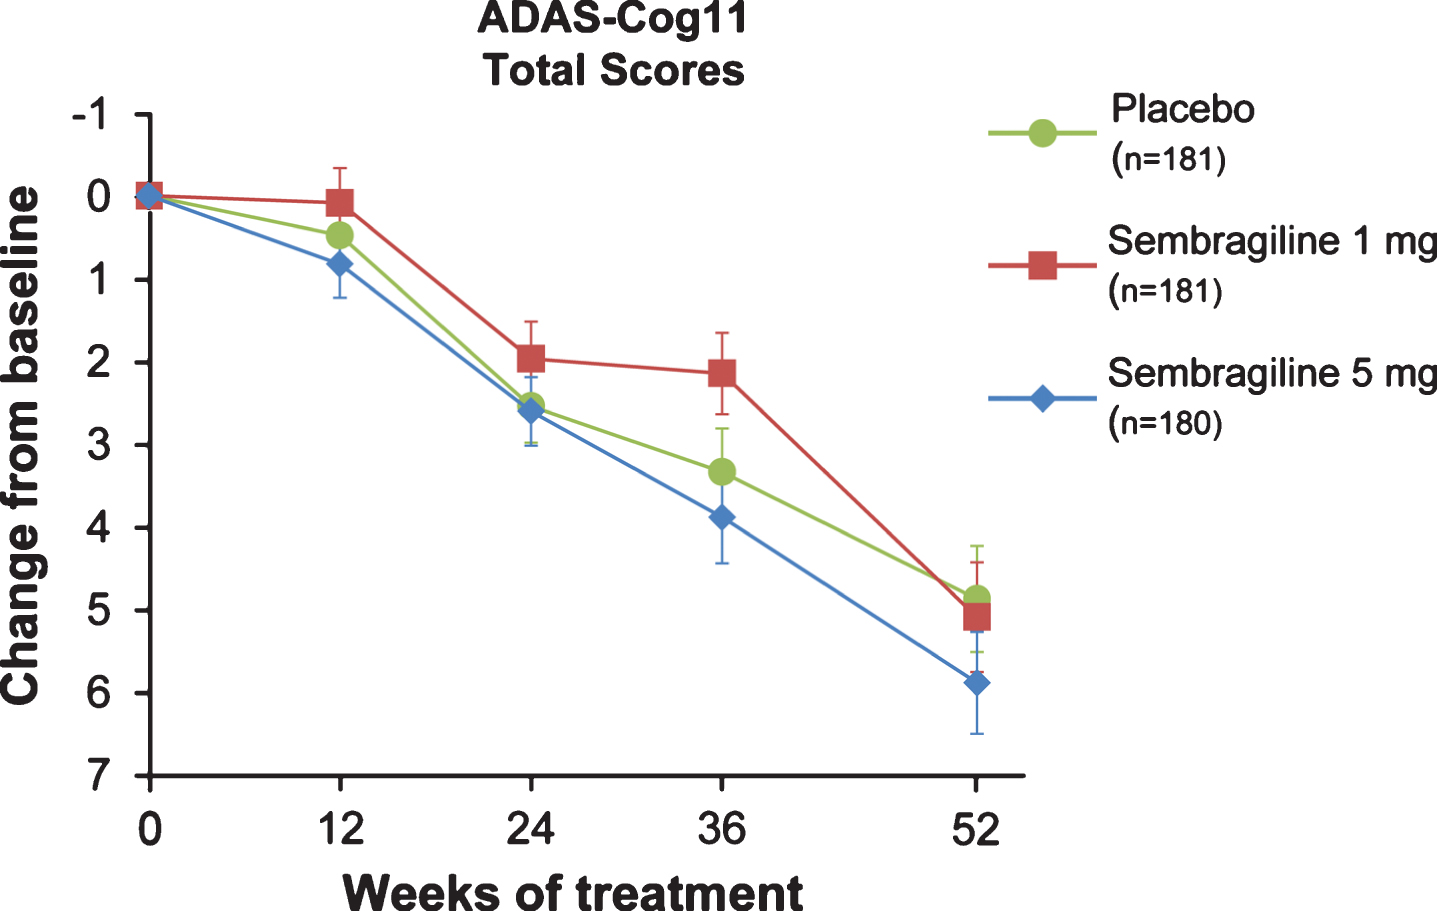 Change of cognitive function (primary endpoint) in moderate AD patients treated with sembragiline and placebo. Mean change from baseline to Week 52 in ADAS-Cog11 in total study population. Error bars represent SEM. ADAS-Cog11, Alzheimer’s Disease Assessment Scale-Cognitive Behavior 11-item Subscale; SEM, standard error of the mean.